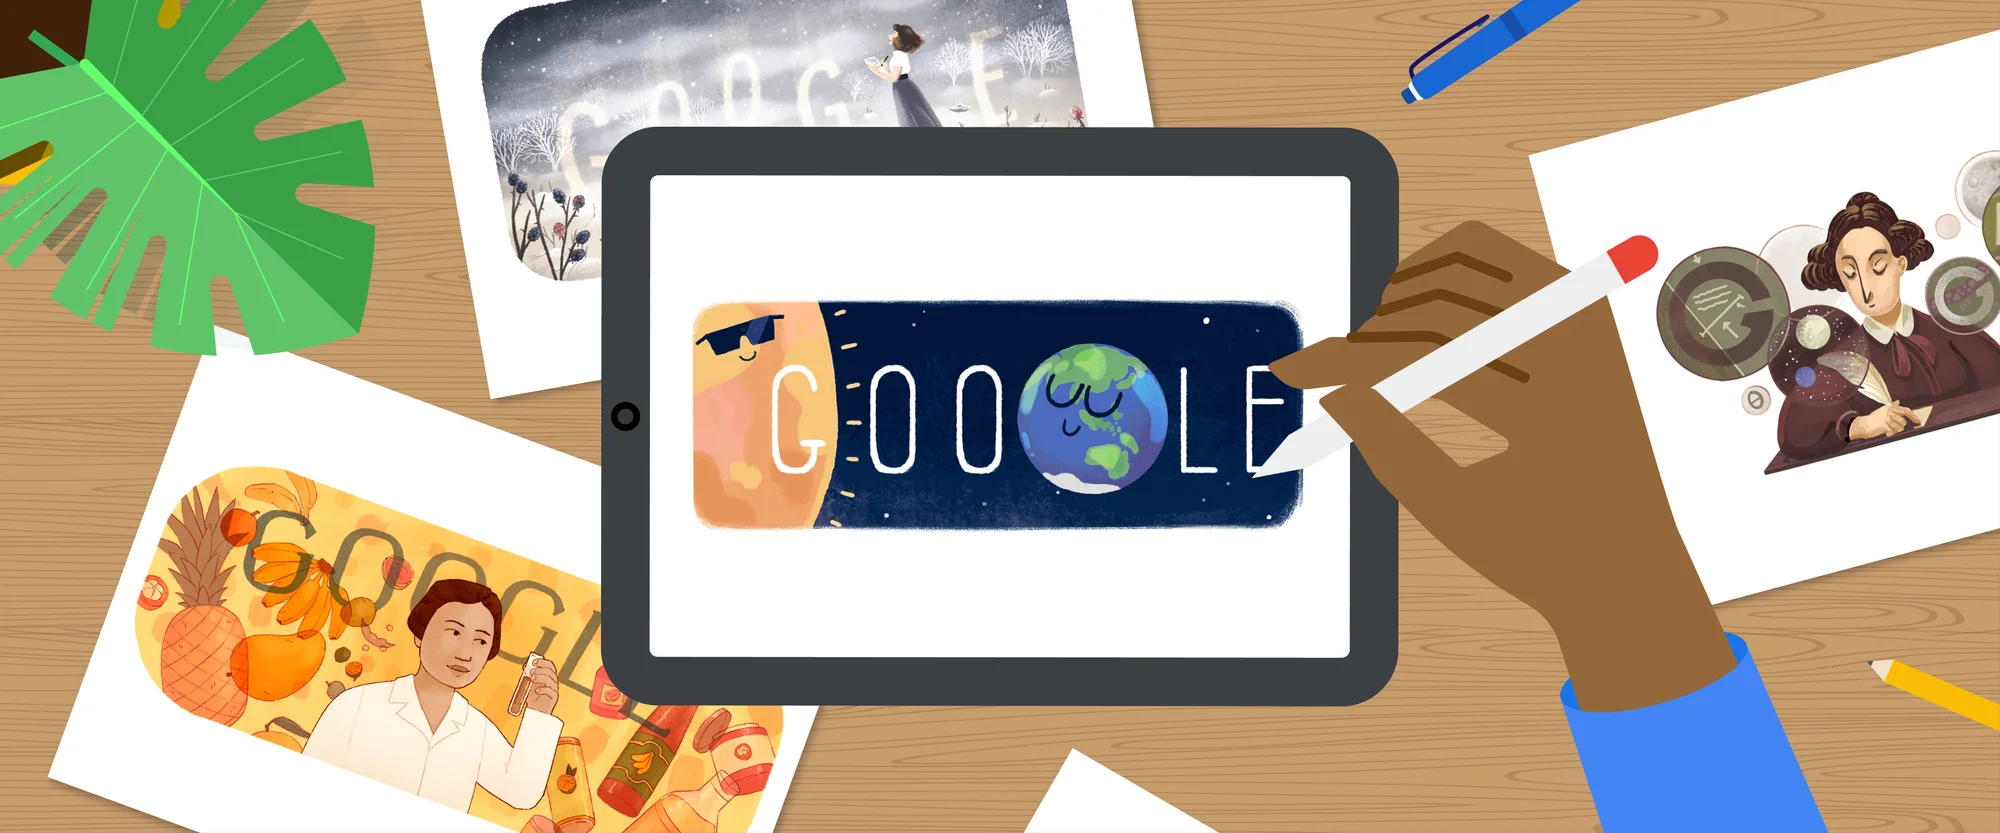 Google Doodle Releases a Series of Mini-Games to Keep People